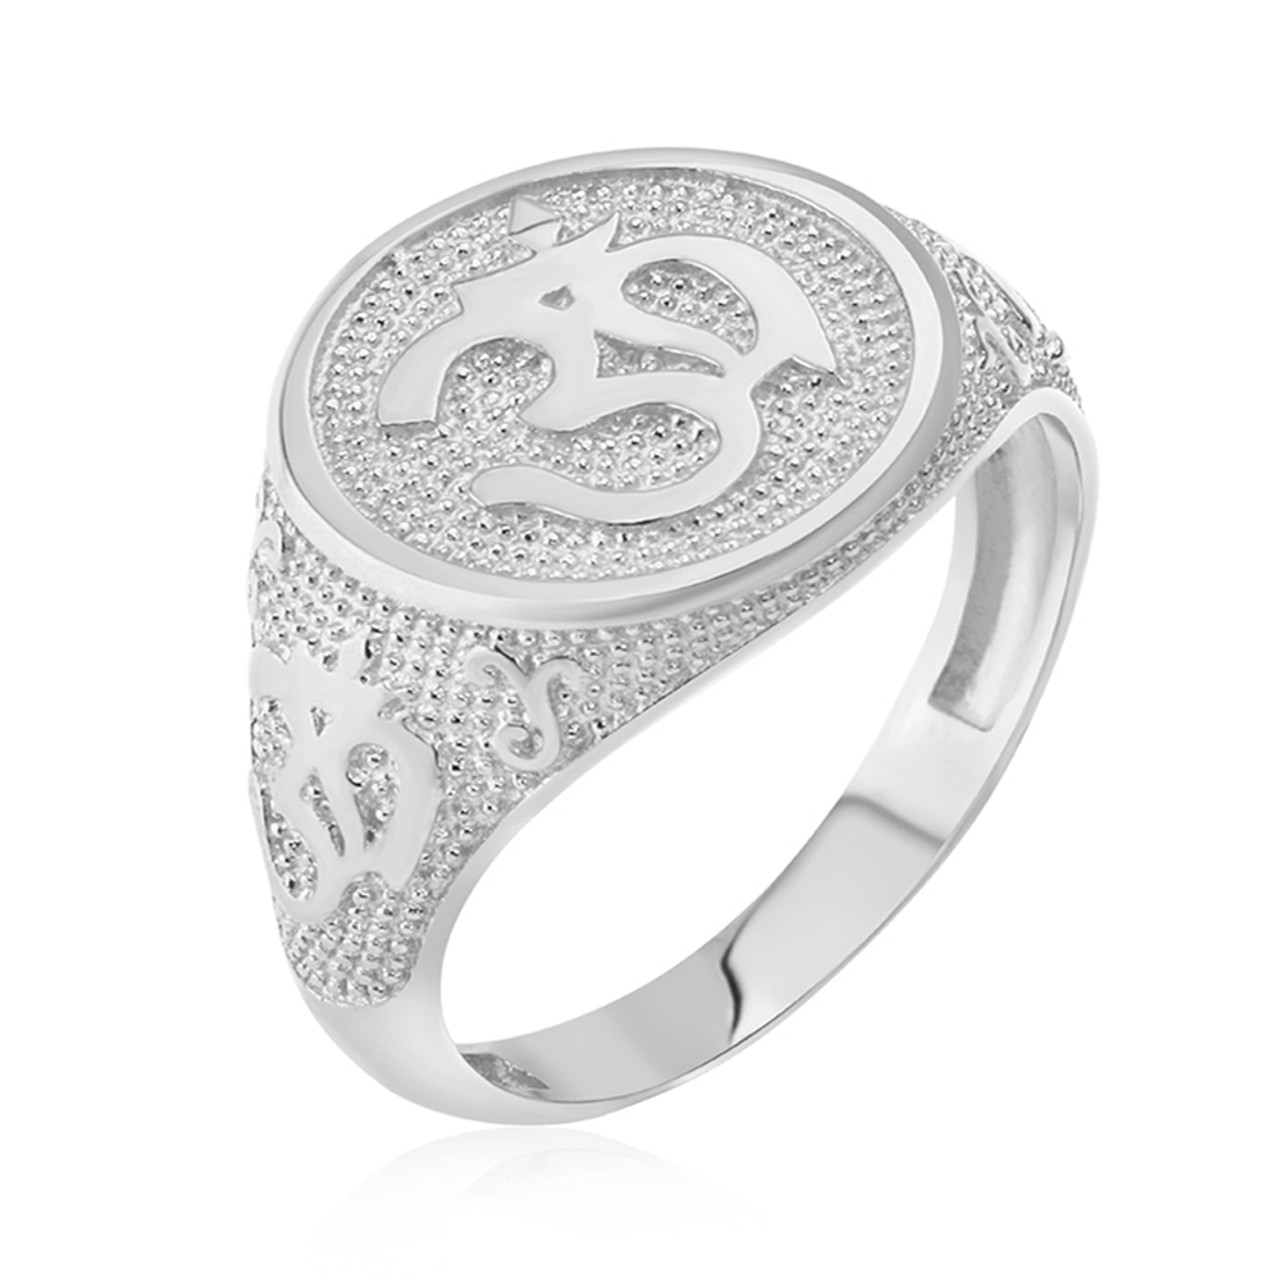 LOTUS AND OM RING STERLING SILVER ADJUSTABLE BAND – THE MOONFLOWER STUDIO